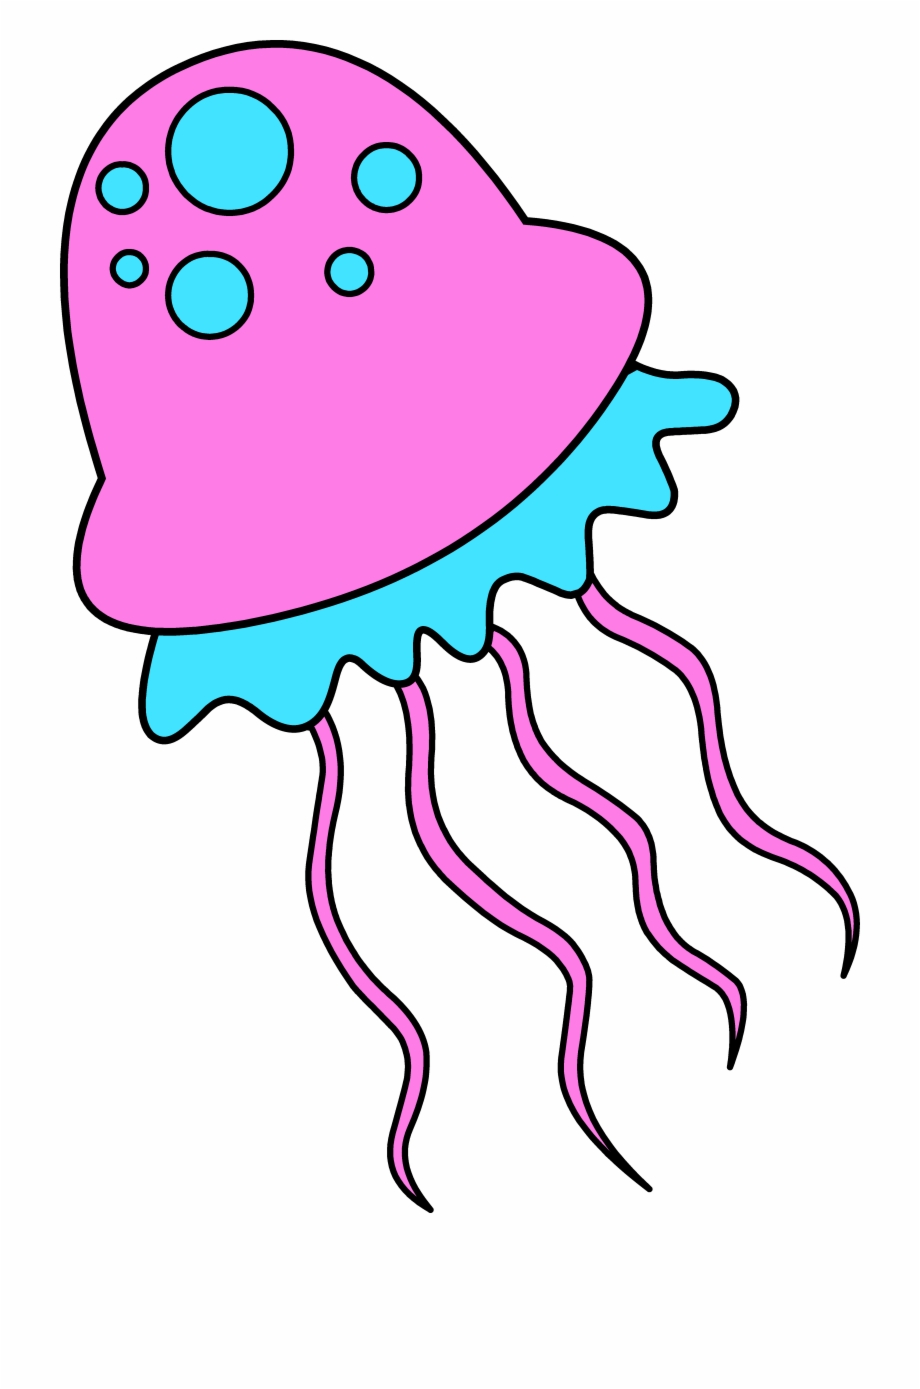 Jellyfish clipart jelly.